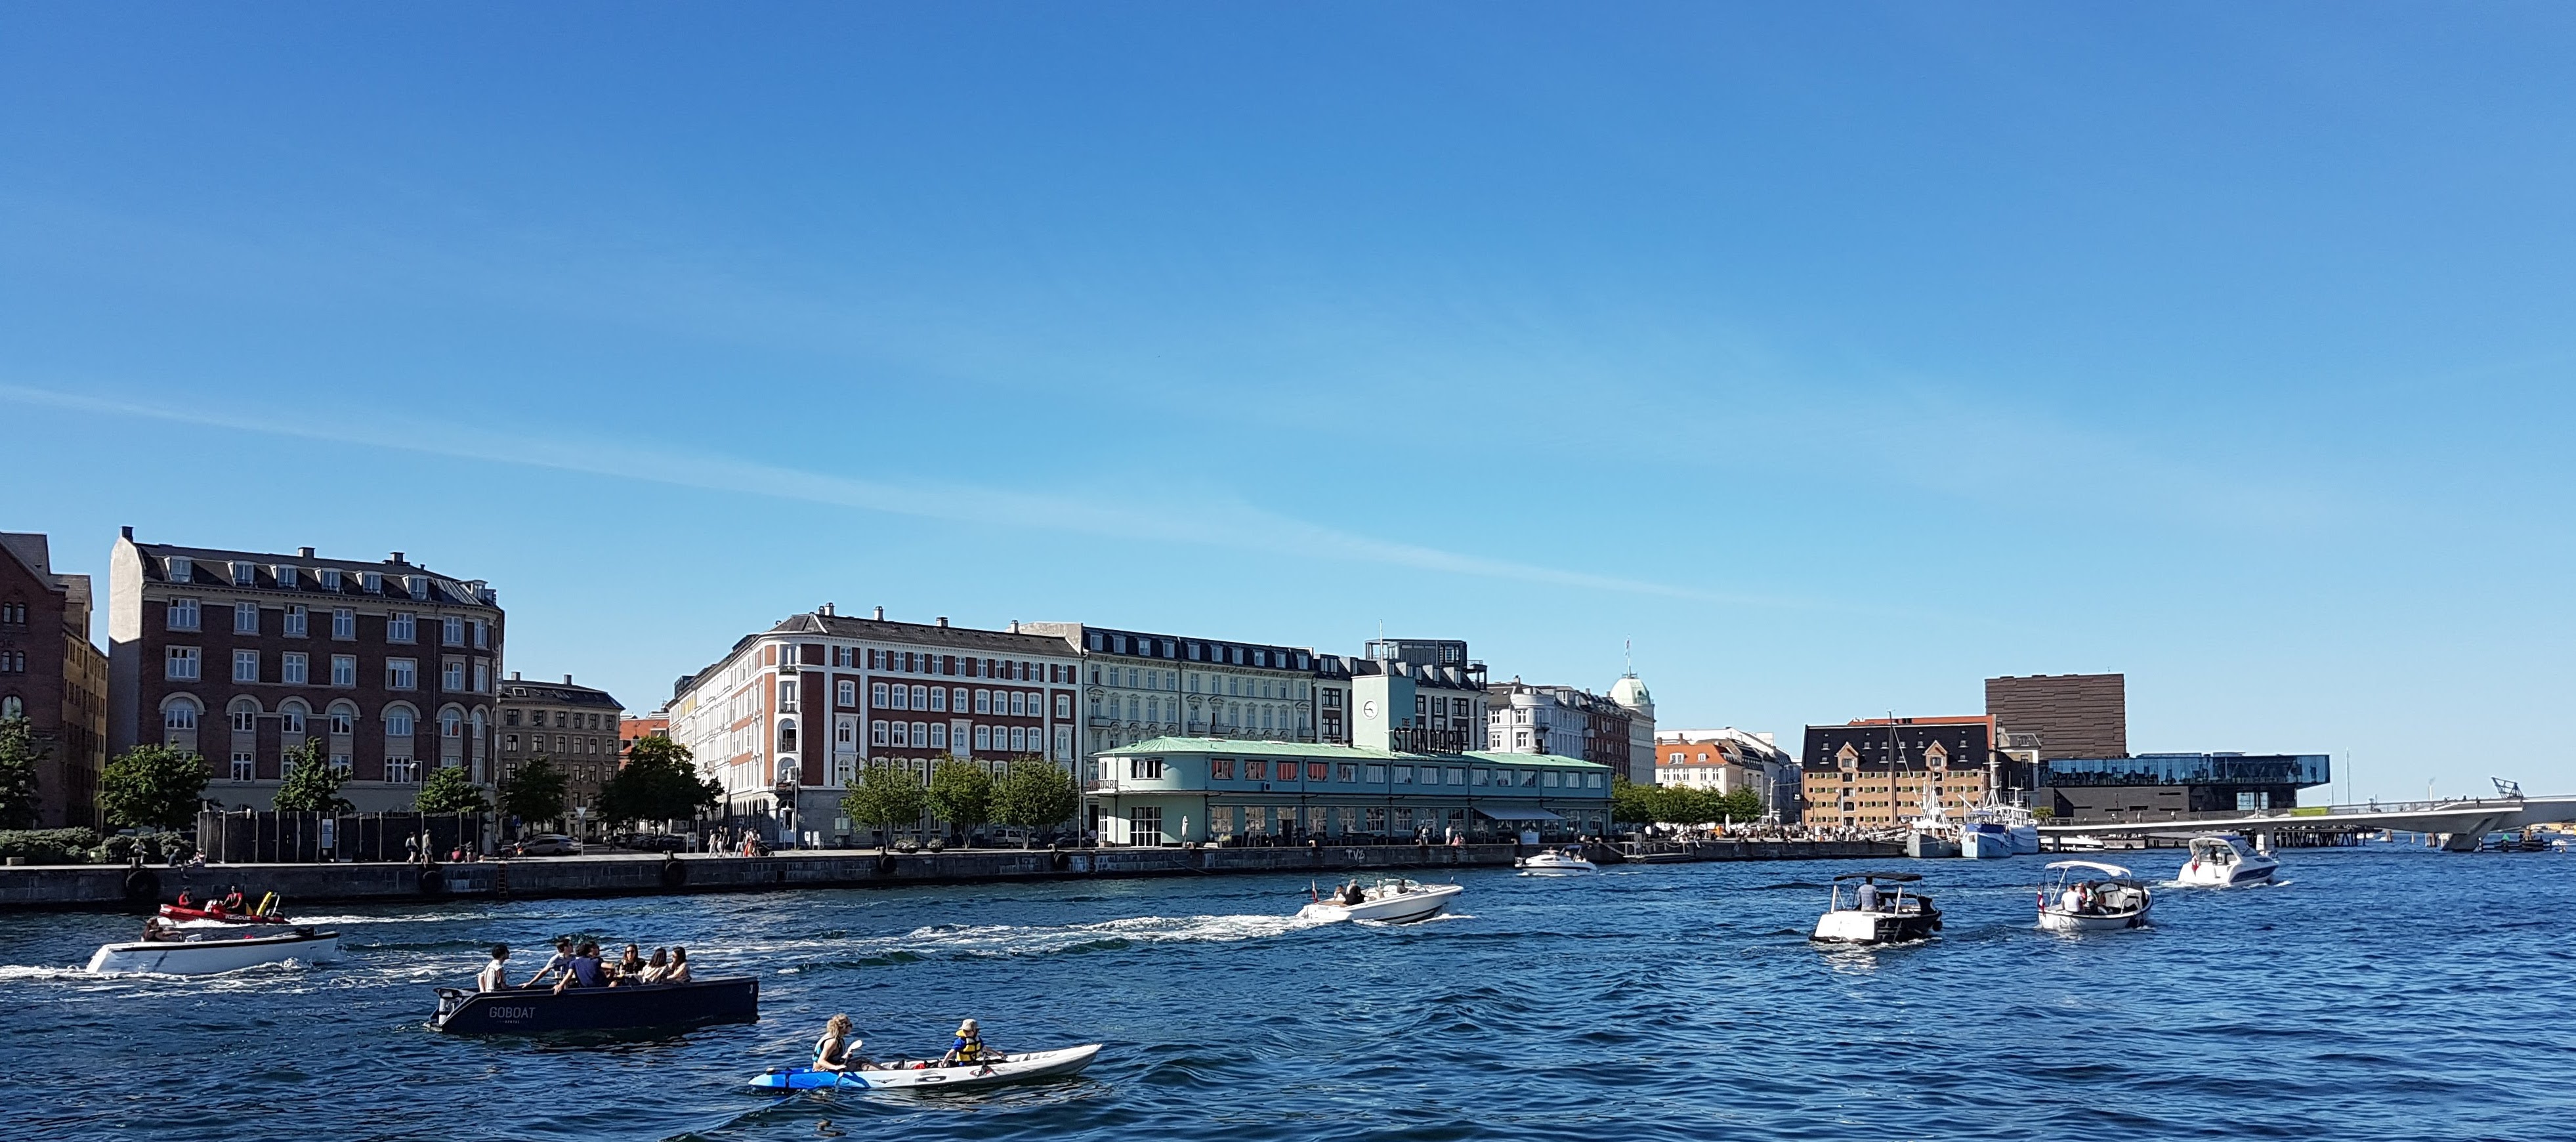 Copenhagen canals cruise with a picnic boat, July